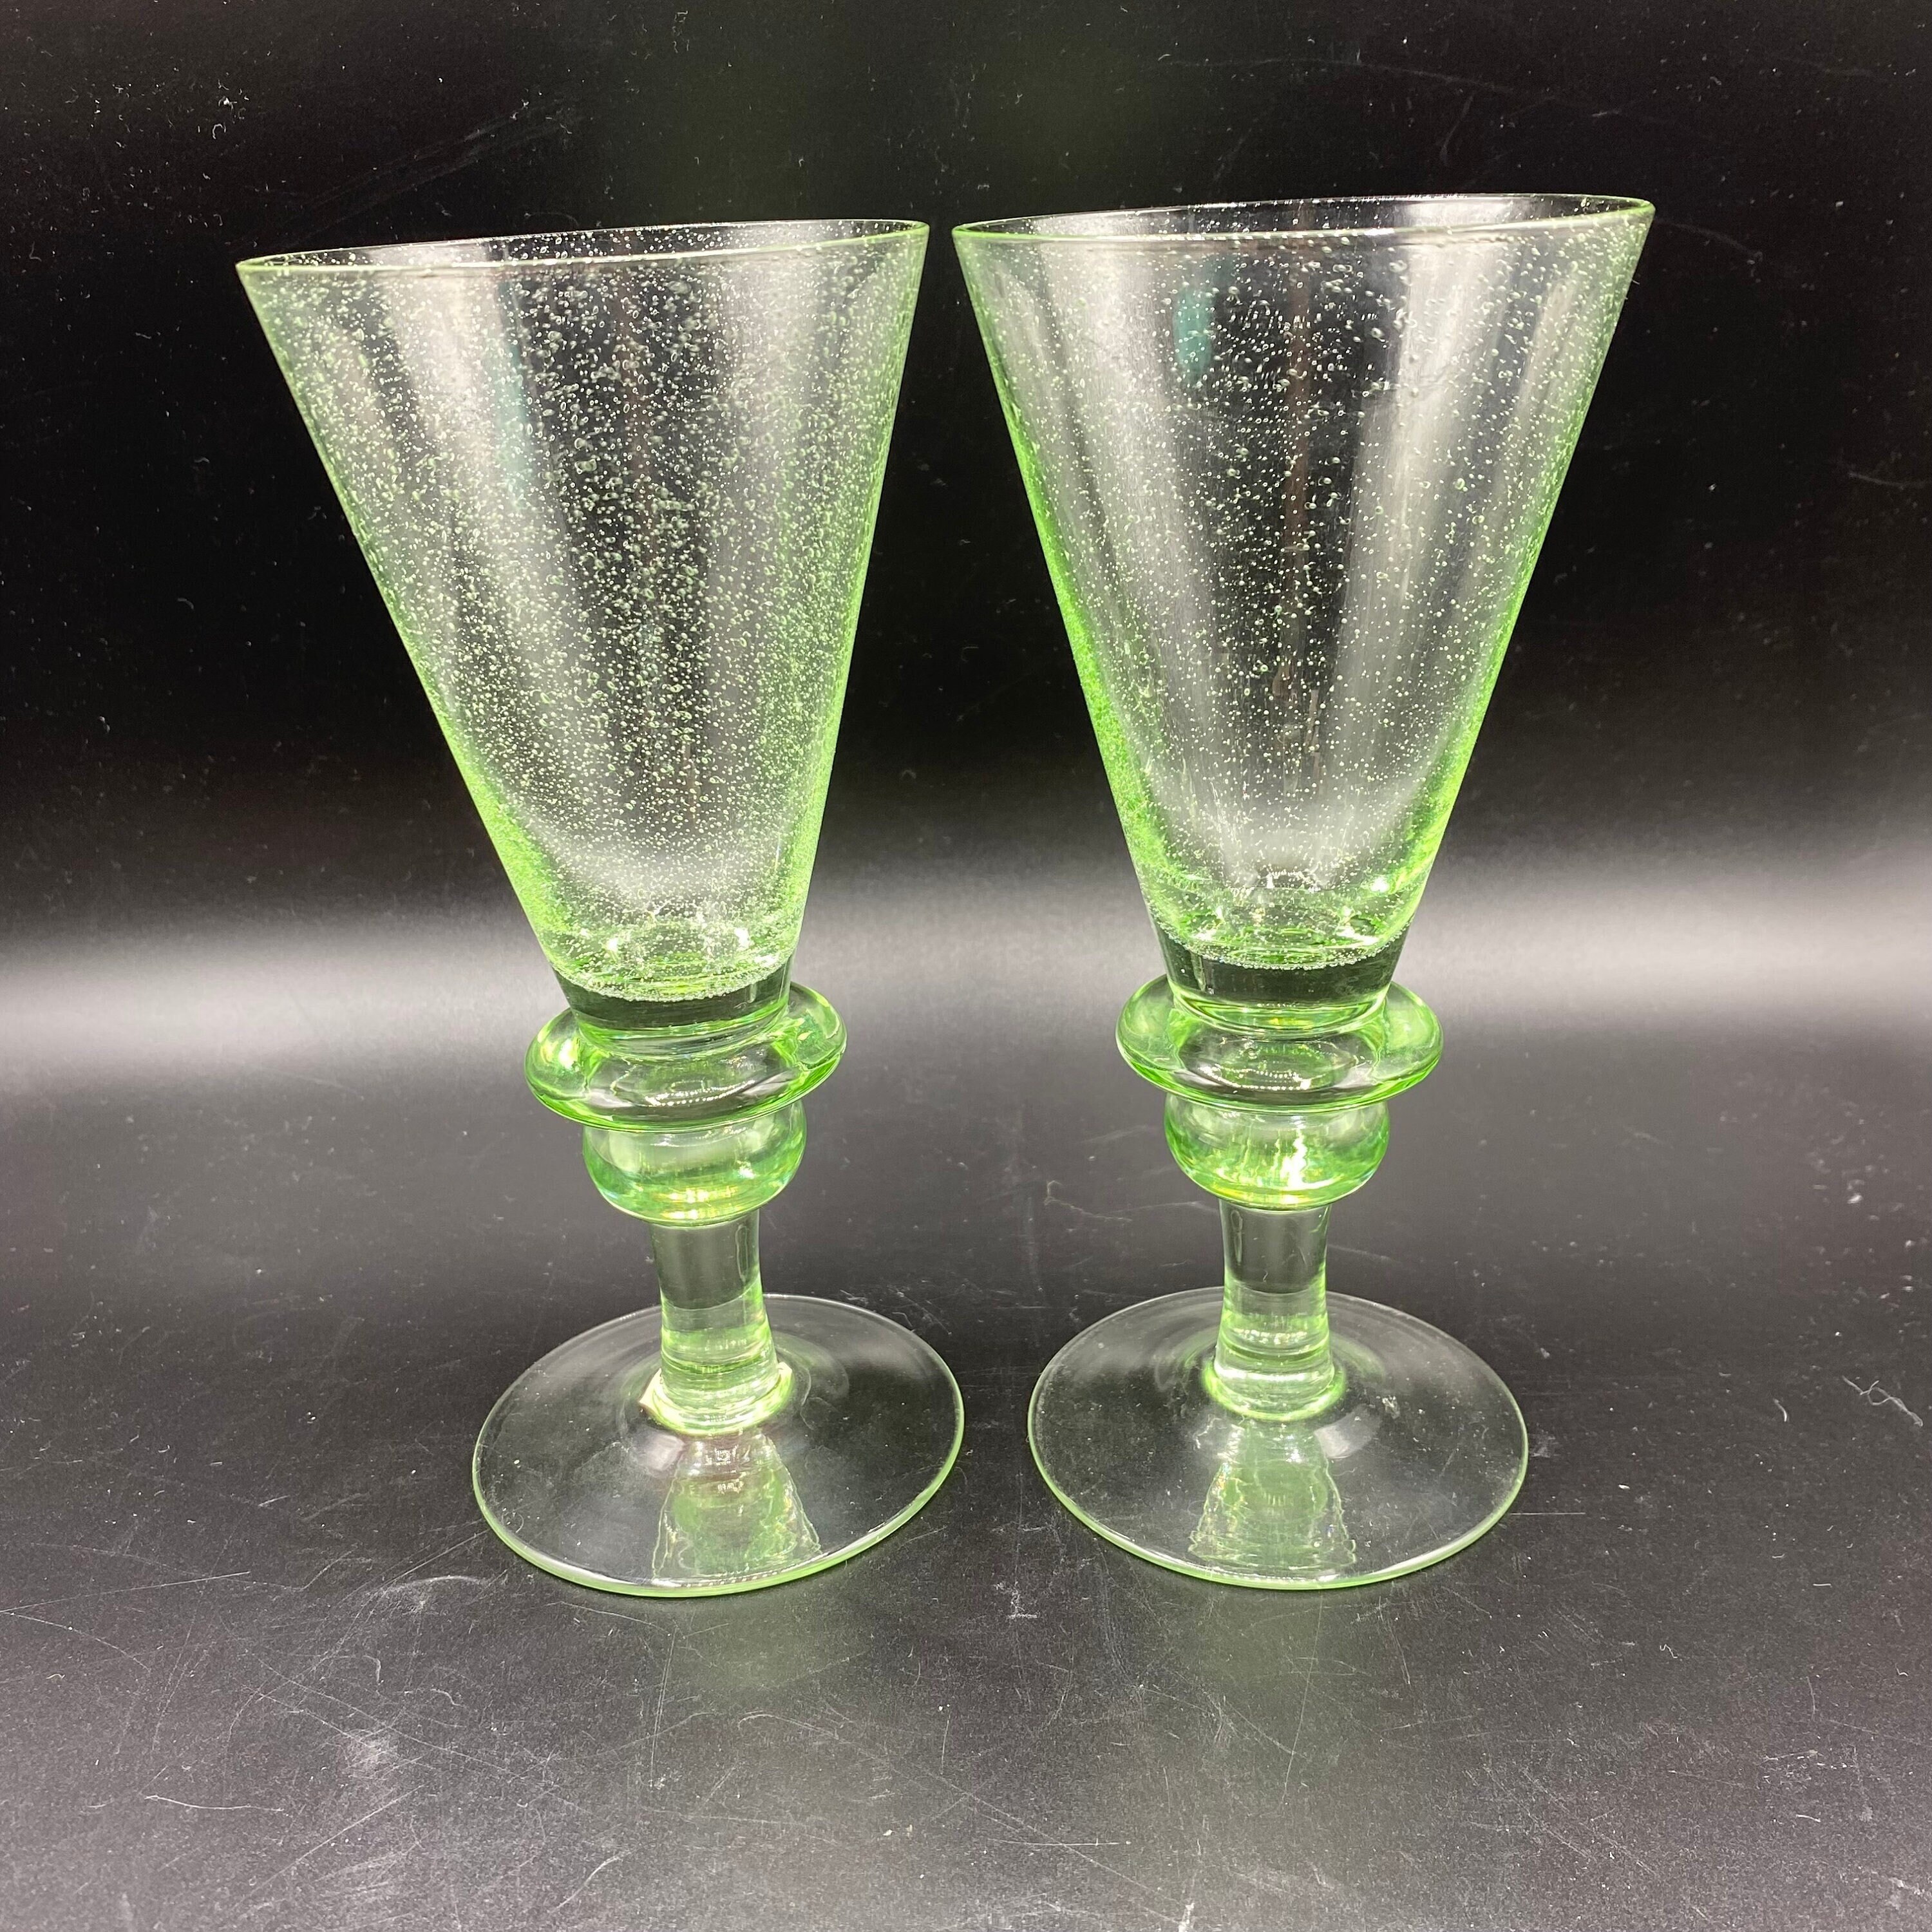 Set of 3 Goblets with Green Stems and Base, Etched Grapes - Ruby Lane